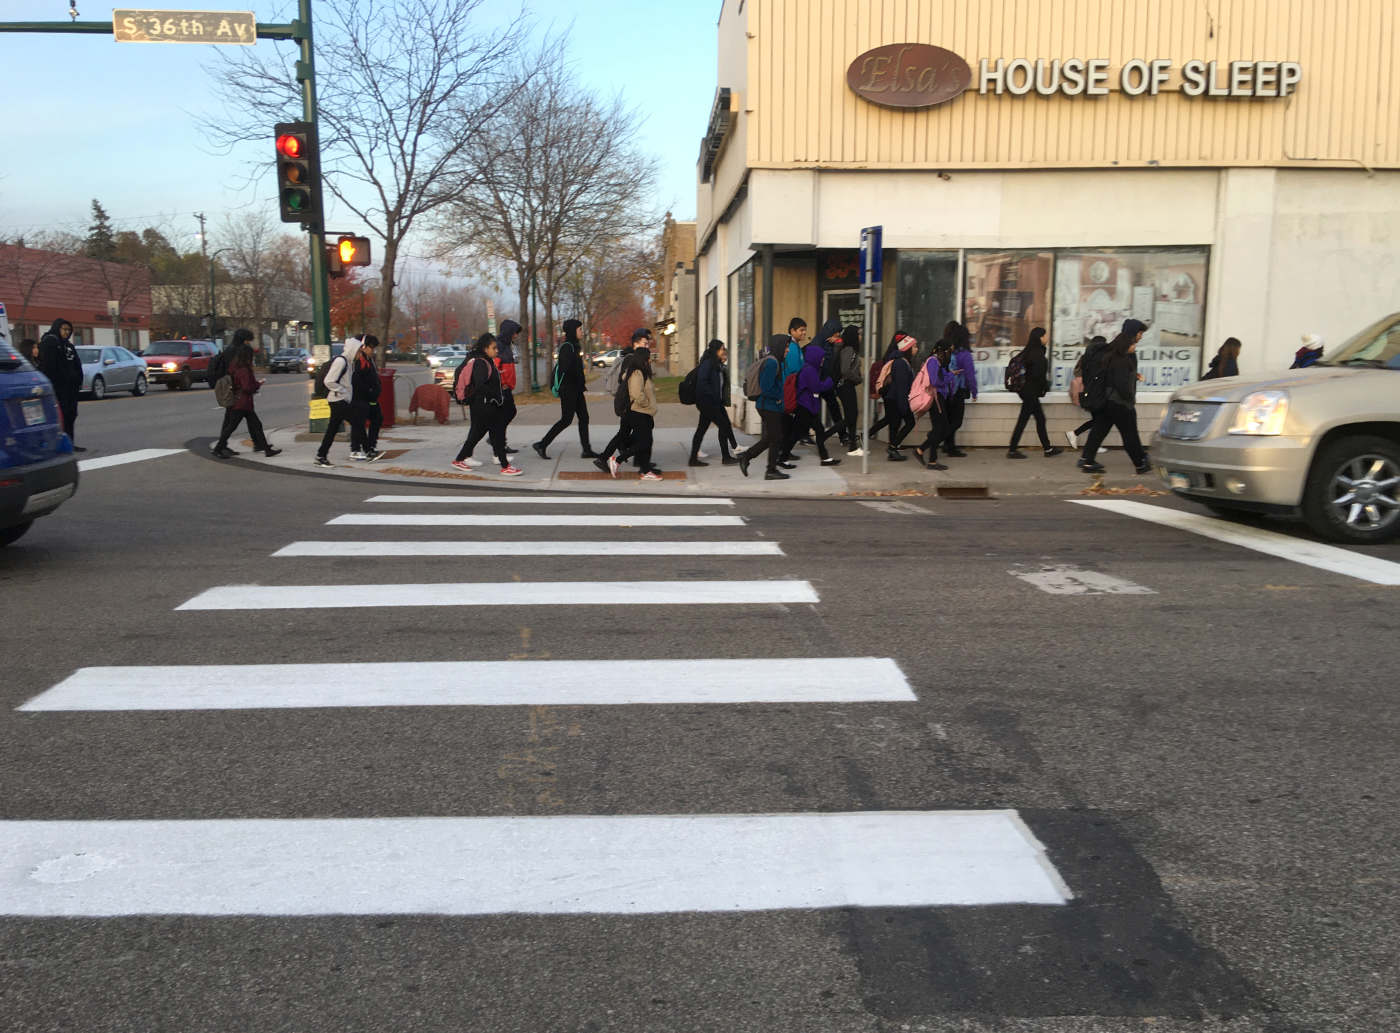 Line of young people walking on a sidewalk across a street with a House of Sleep building on the corner and painted crosswalk in the foreground